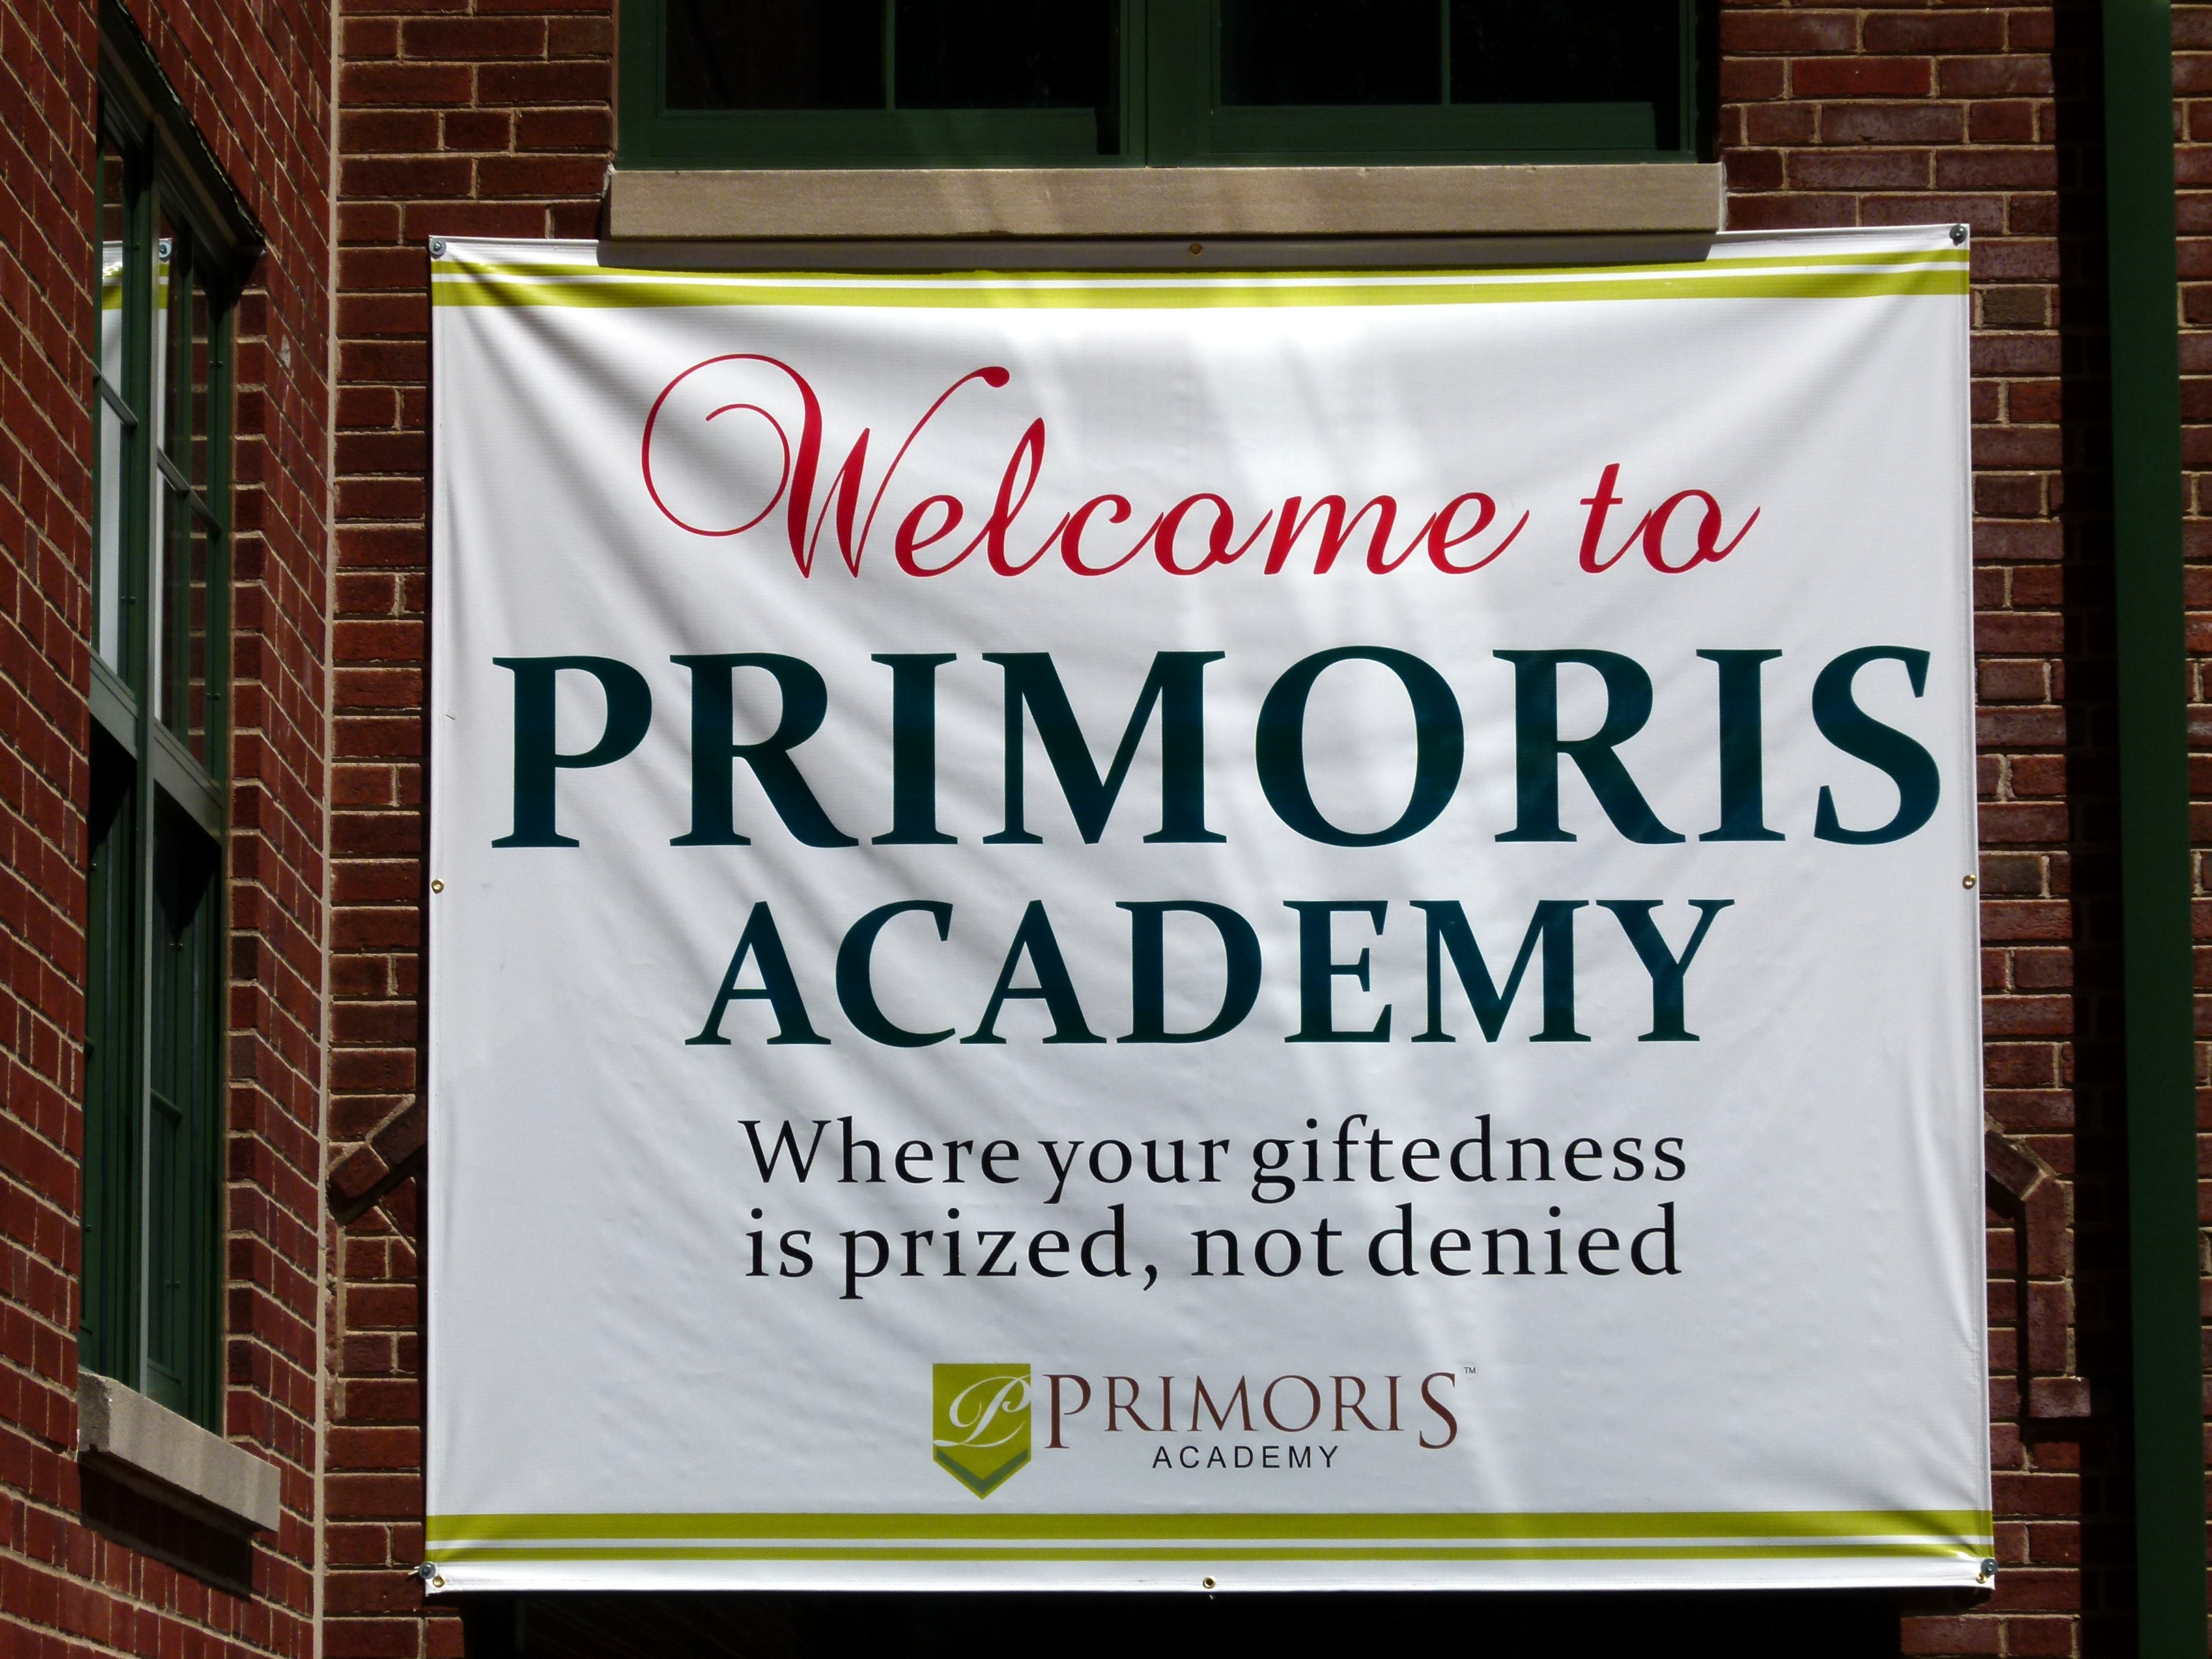 Primoris Academy - "Where your giftedness is prized, not denied."